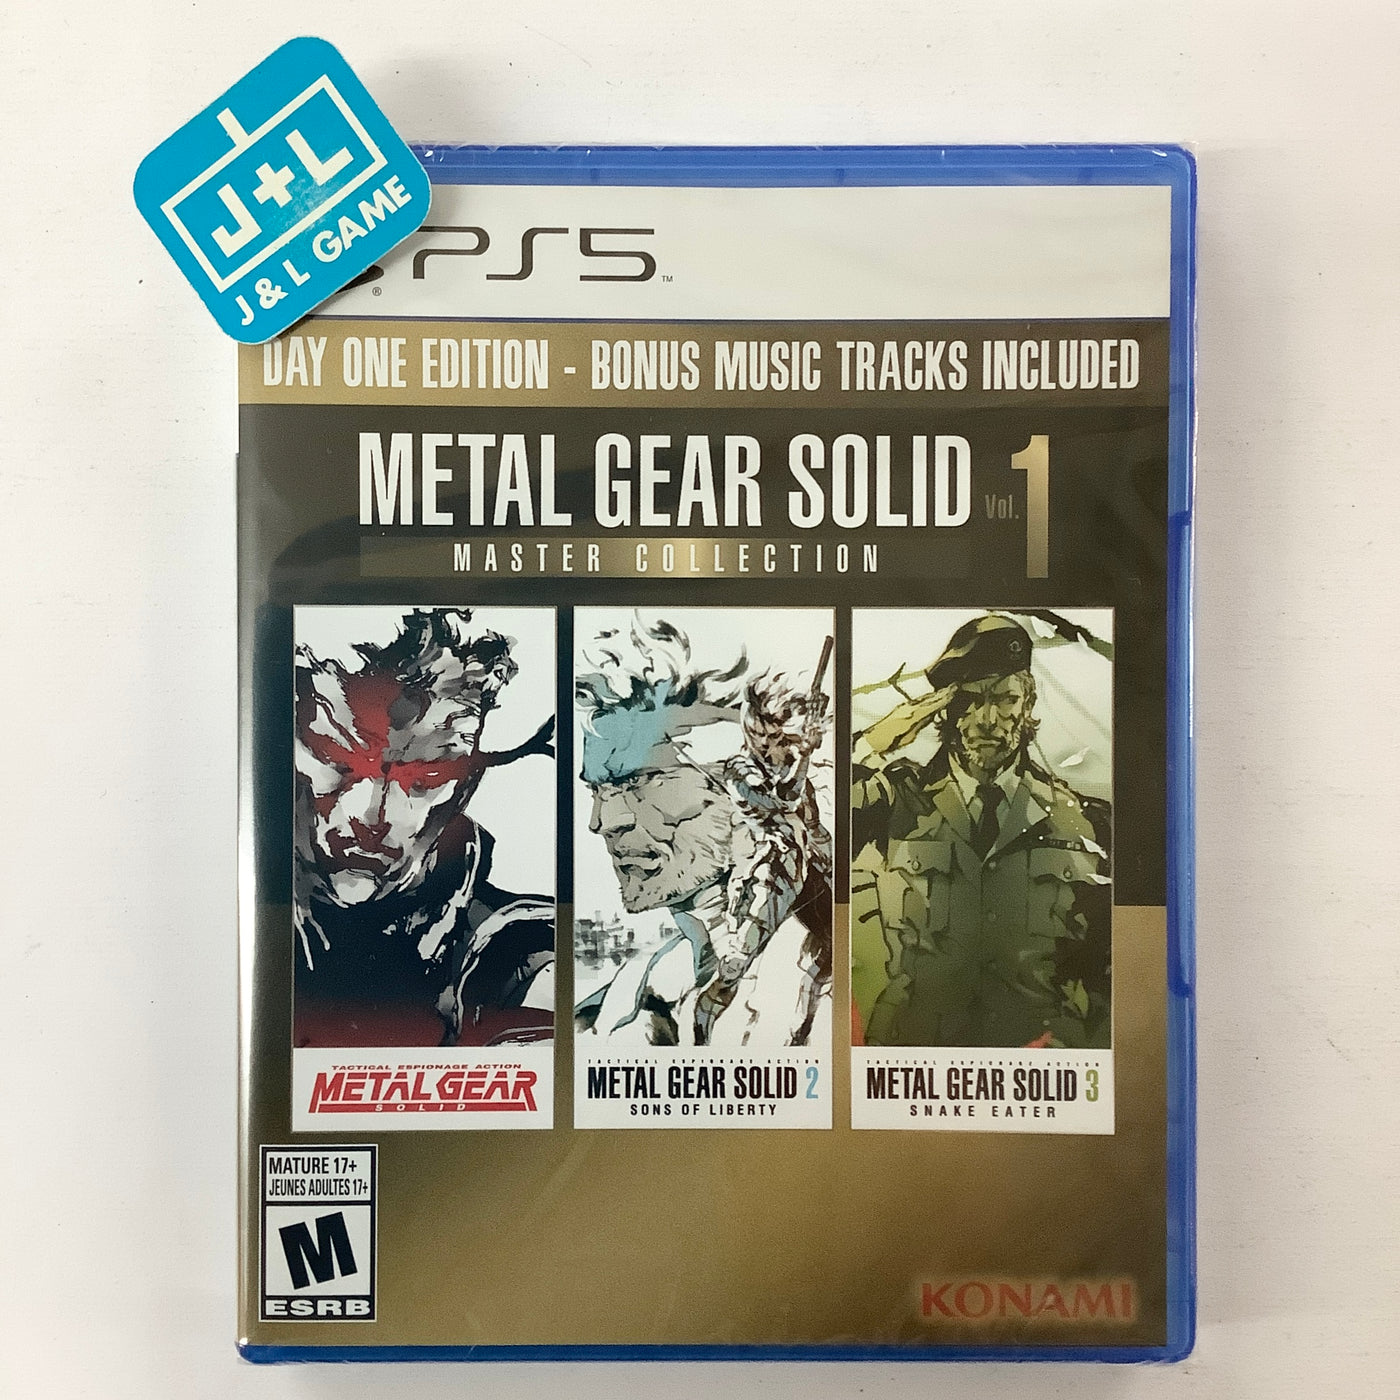 Metal Gear Solid Master Collection Vol. 1: Release date, games